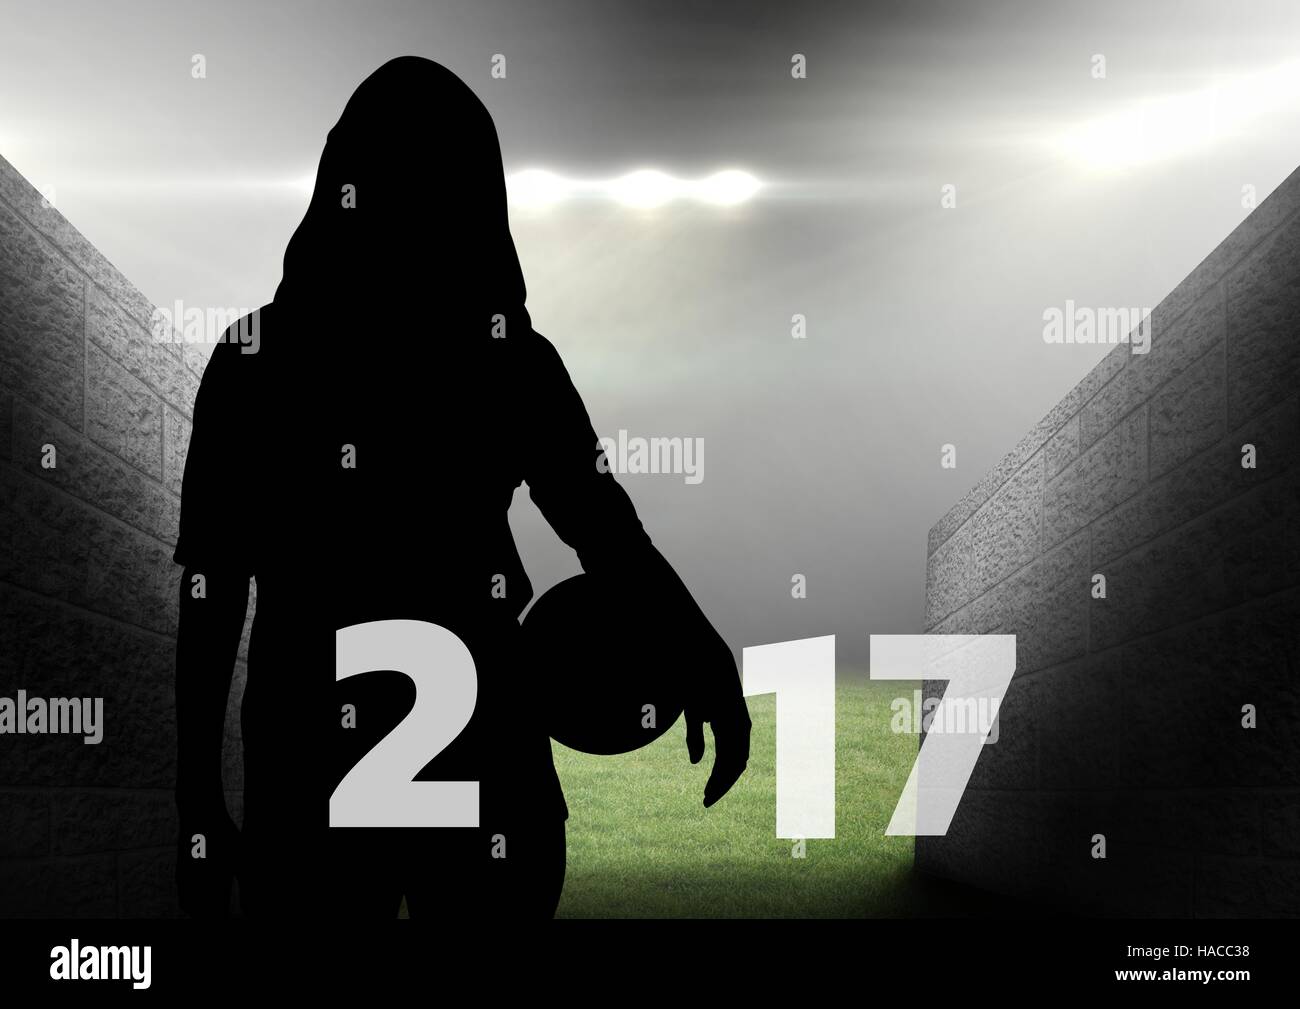 Silhouette of woman holding ball forming 2017 new year sign 3D Stock Photo